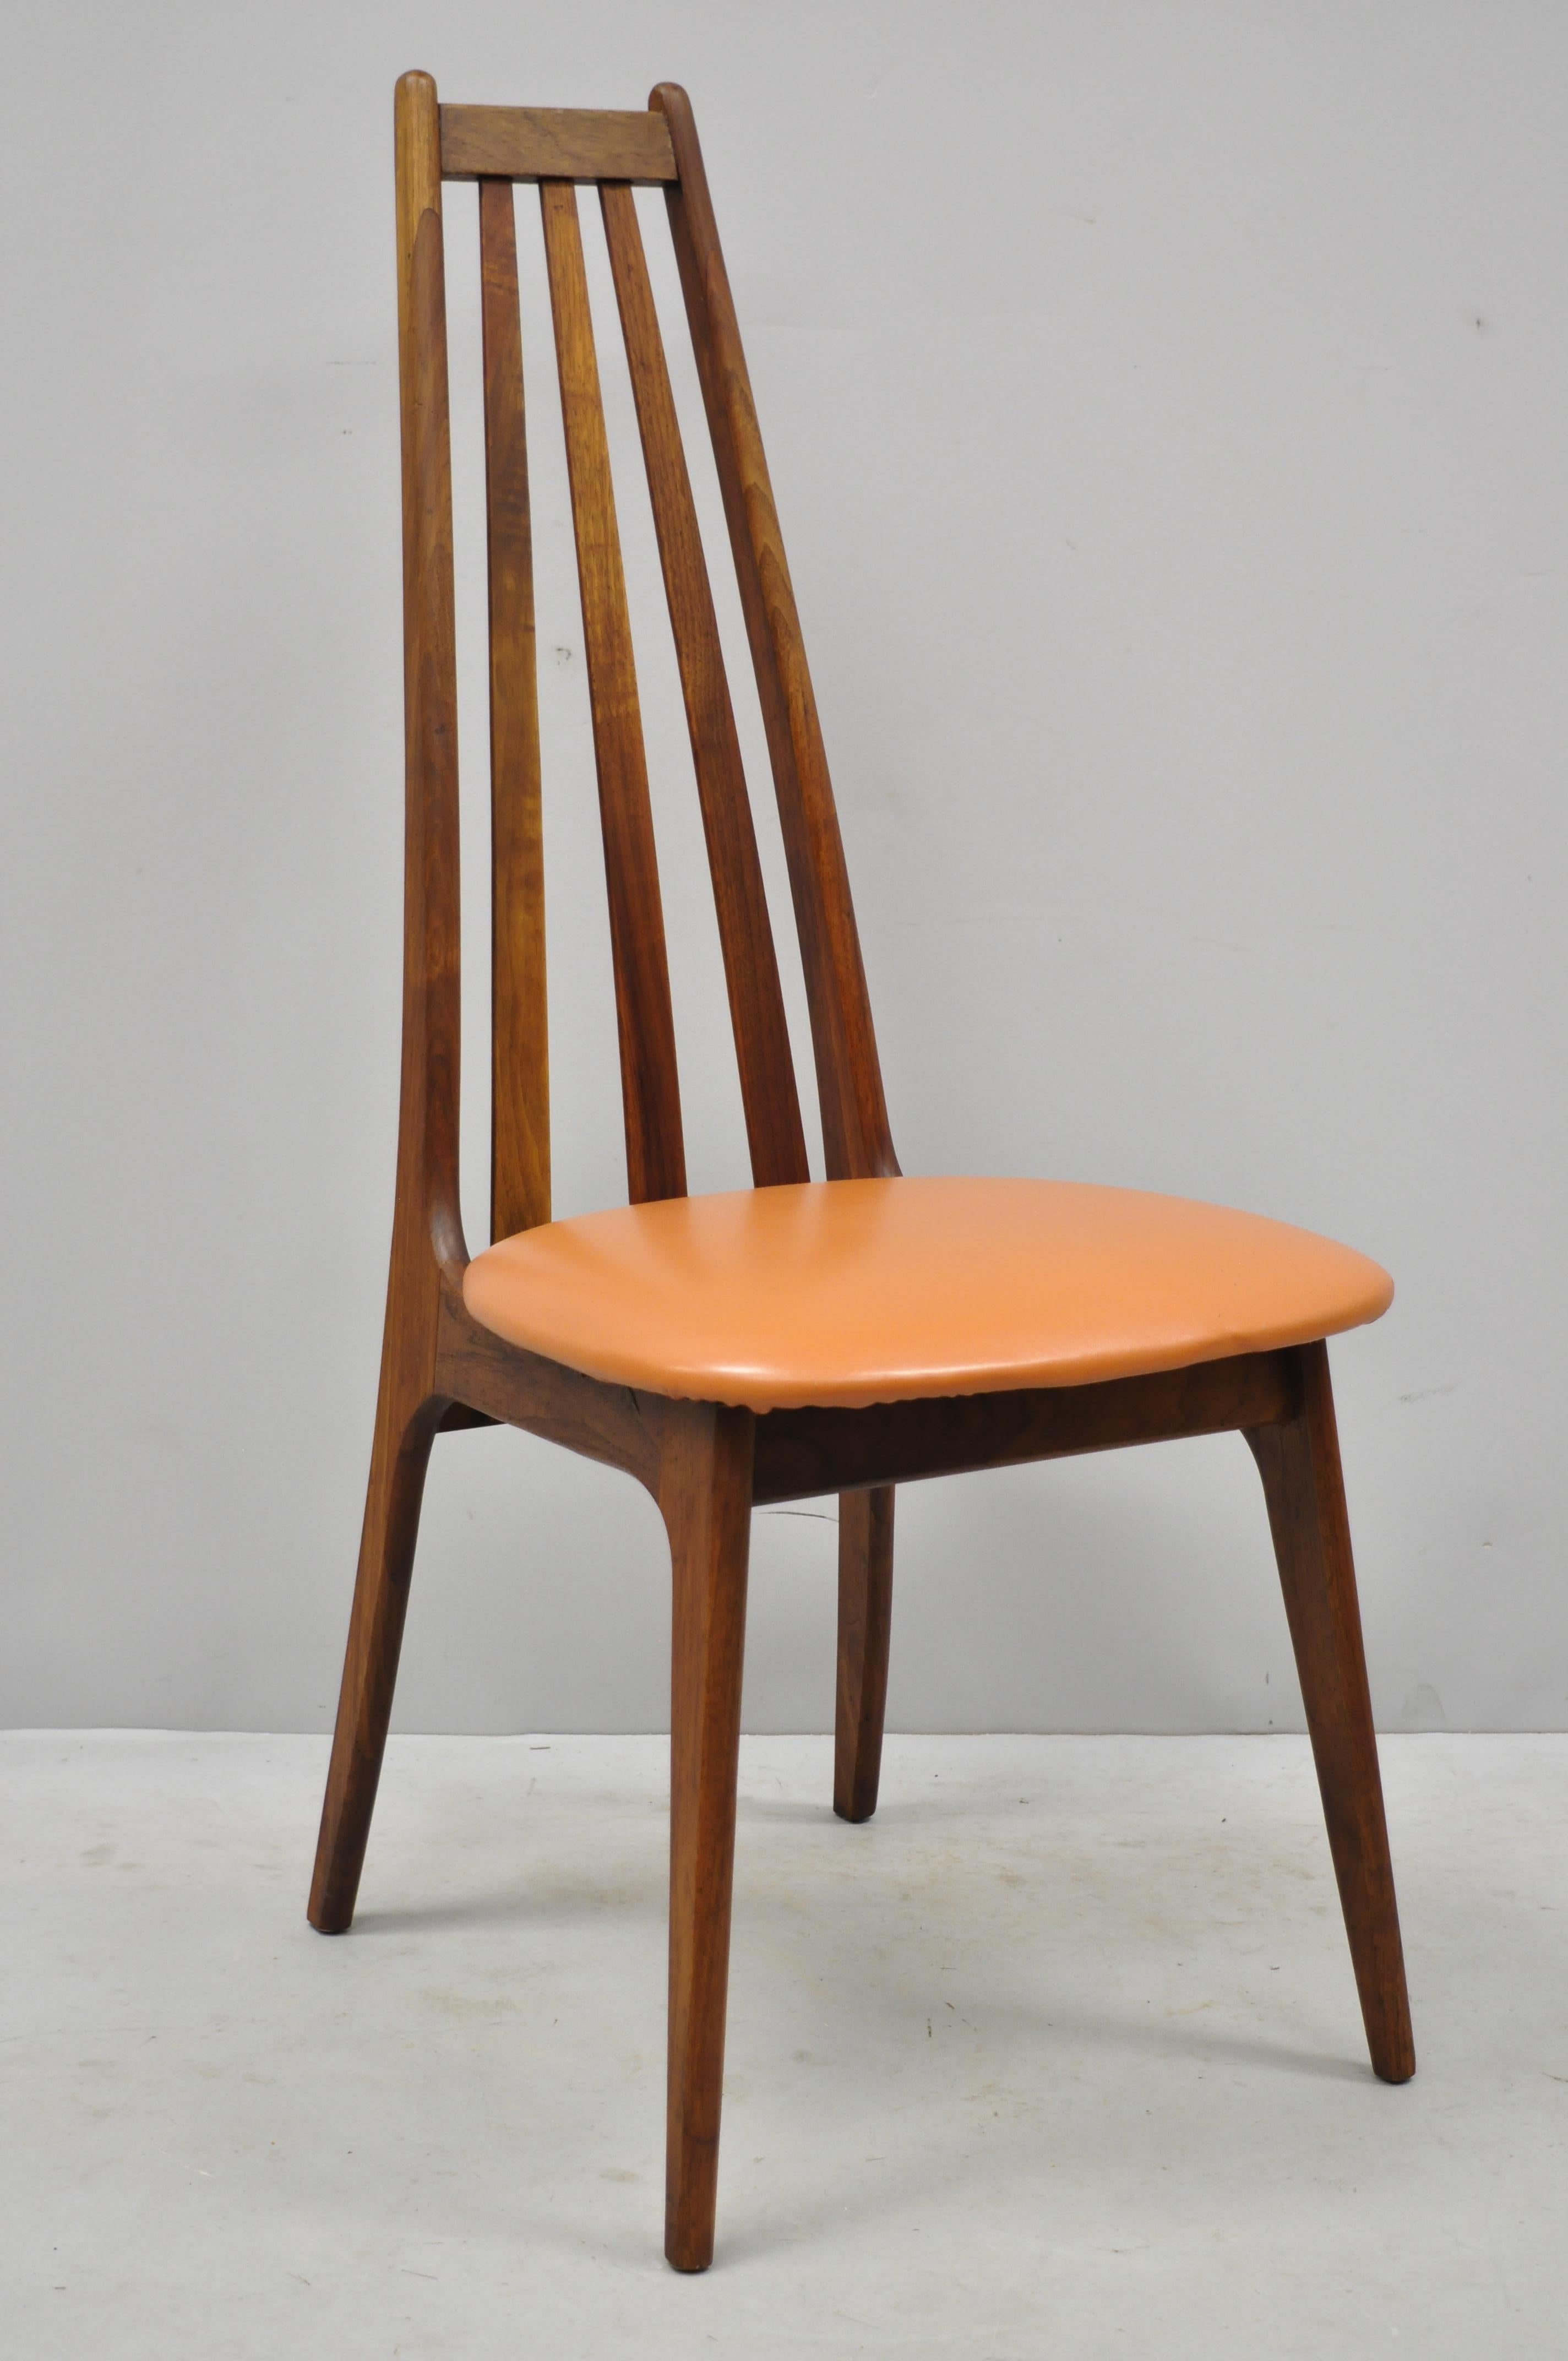 4 tall back vintage Danish modern teak wood dining chairs after Adrian Pearsall. Listing features (4) side chairs, tall backs, solid wood construction, beautiful wood grain, tapered legs, clean modernist lines, circa 1960. Measurements: 42.5